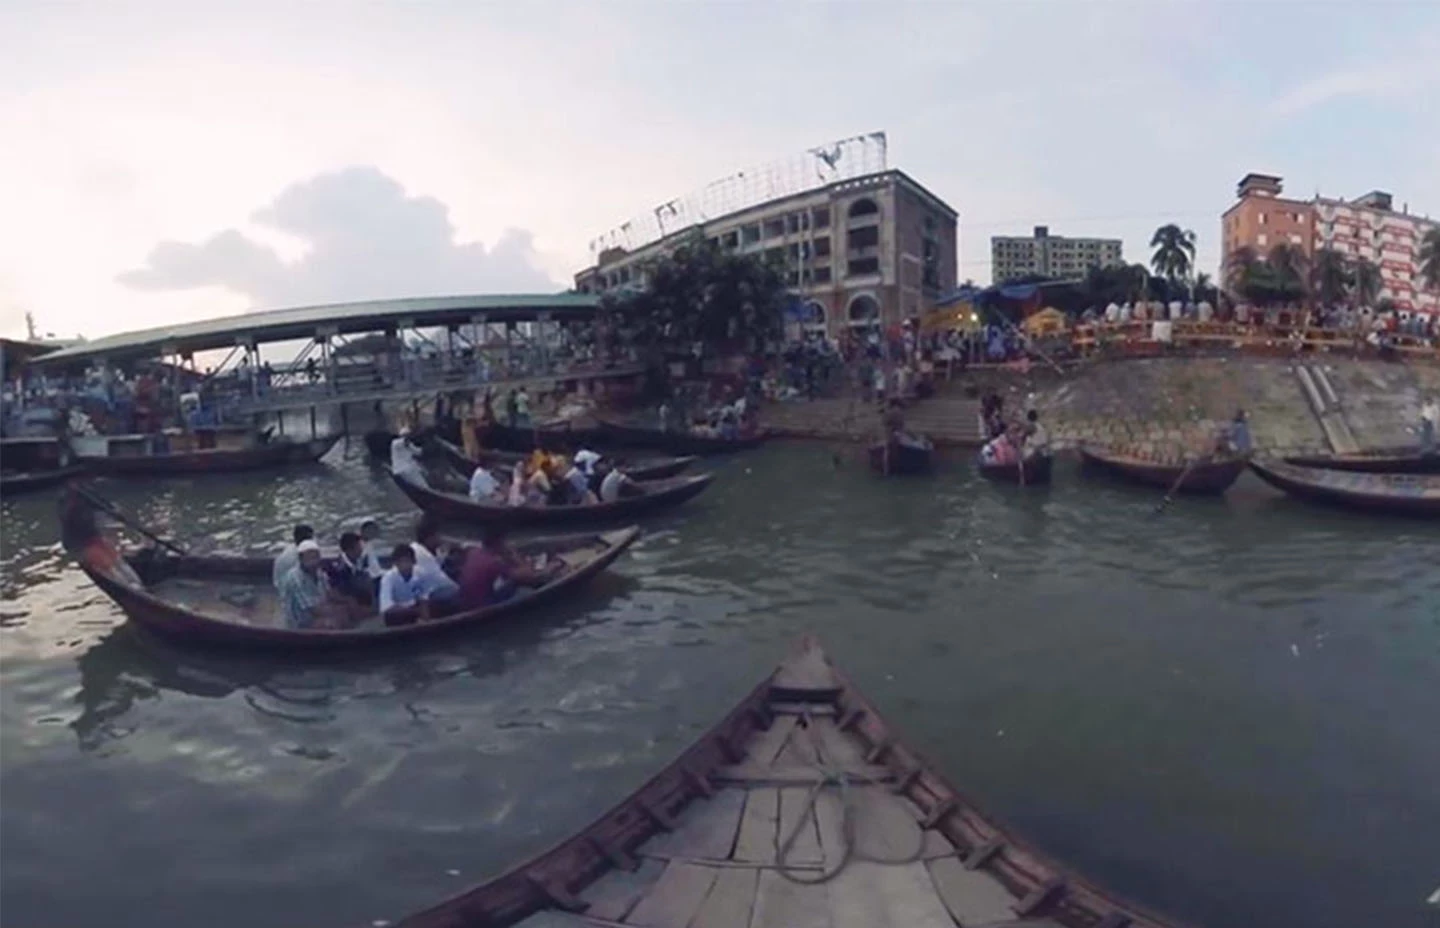 First person view on the front of a gondola boat floating on a busy river